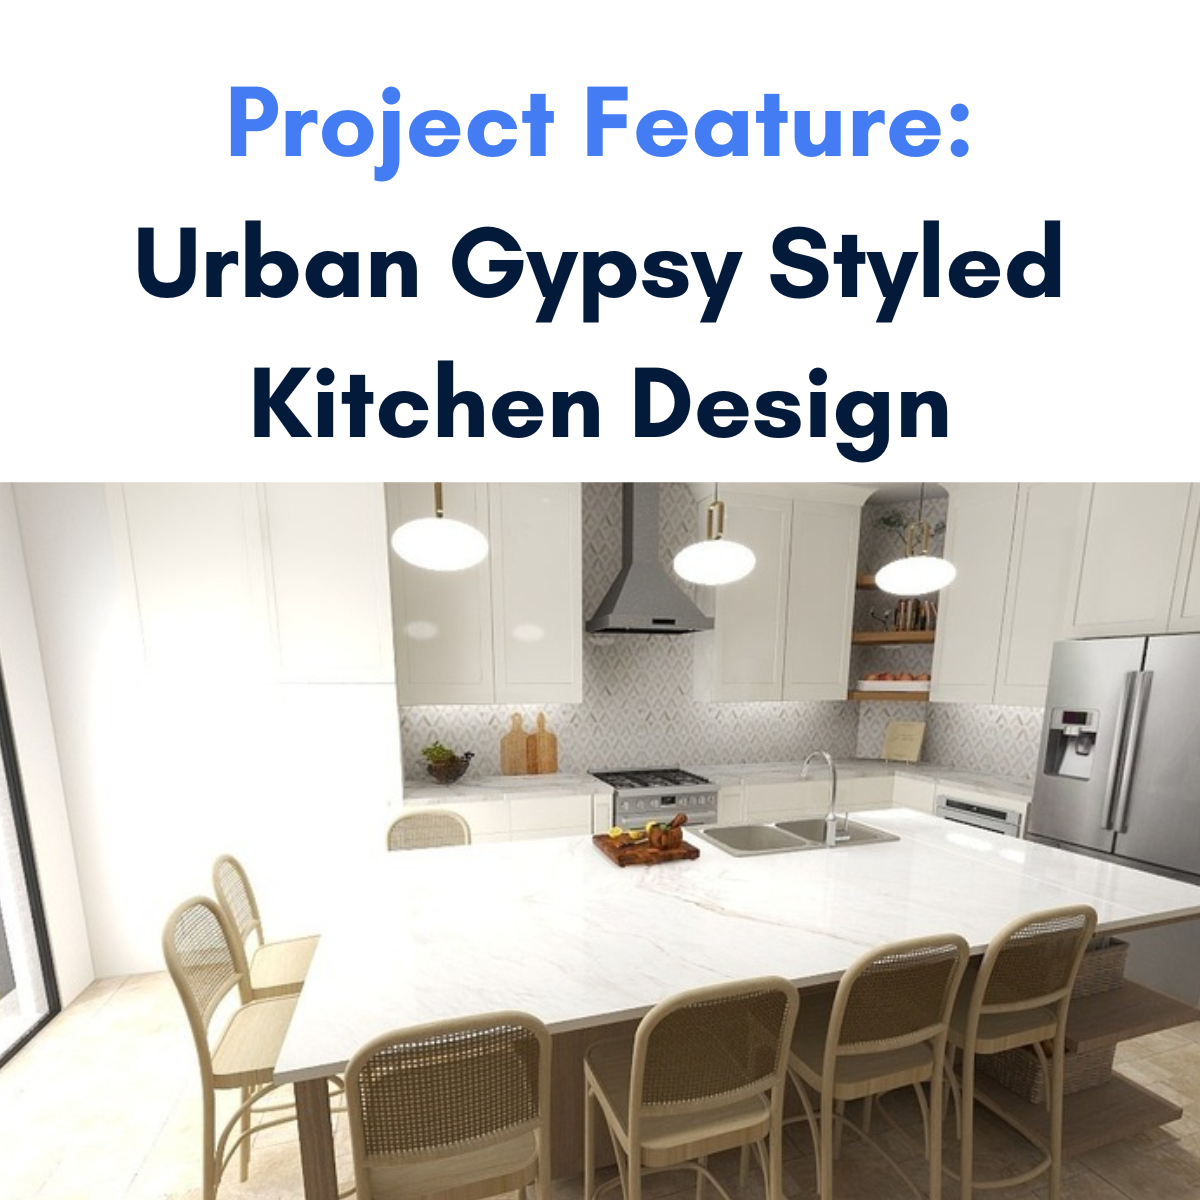 Project Feature: Urban Gypsy Styled Kitchen Design